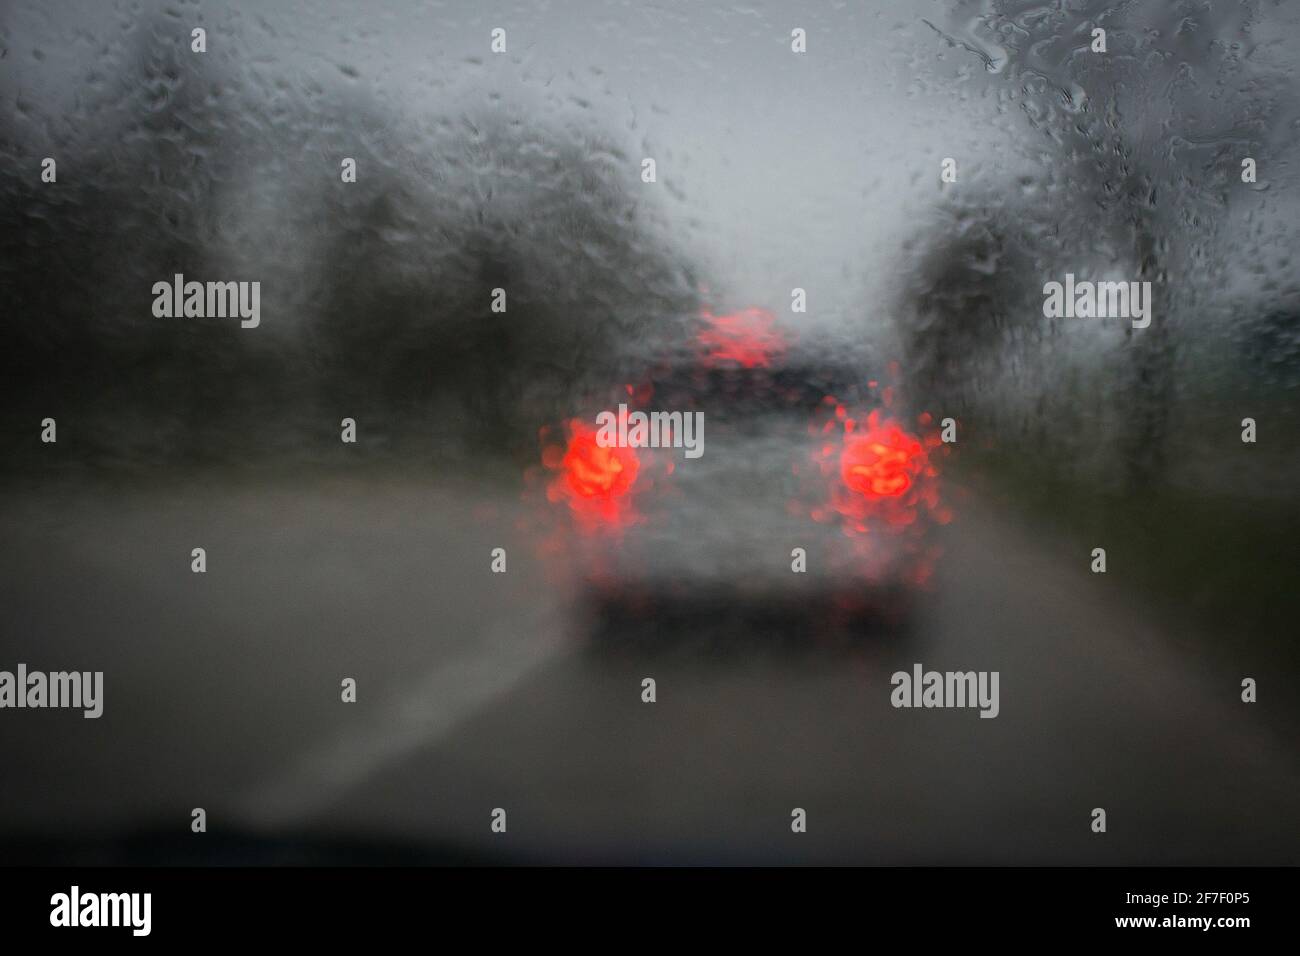 Rain drops on a car windshield preventing good visibility of a car braking in front. Concept of late reaction time due to dirty and rainy windshield. Stock Photo